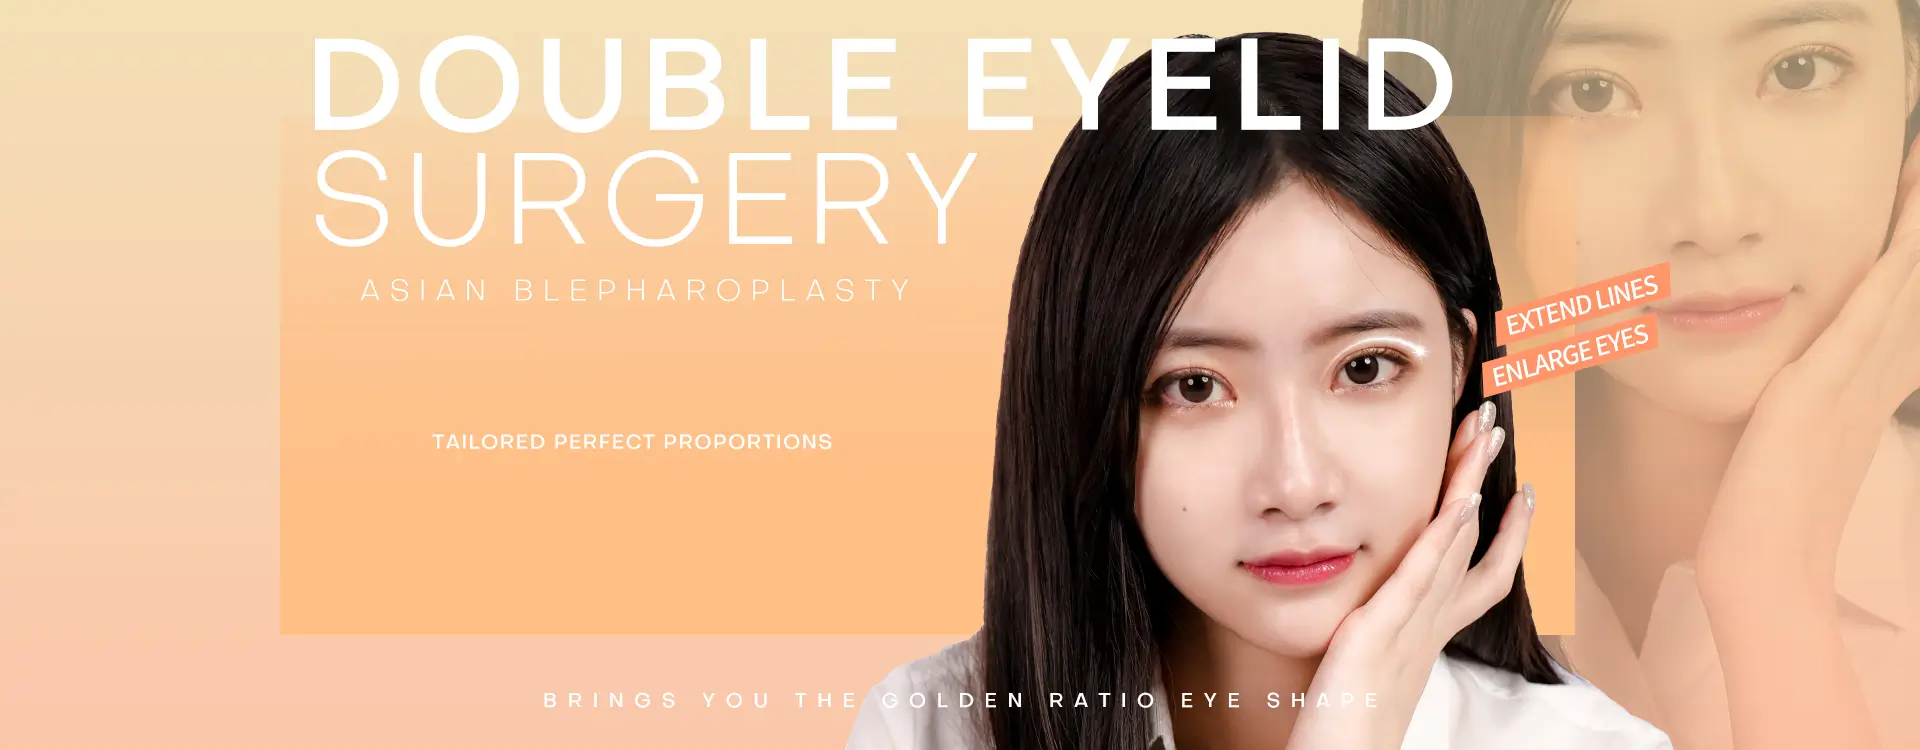 Korean-style Delicate Double Eyelid Surgery: Extend Lines, Enlarge Eyes, Tailored Perfect Proportions